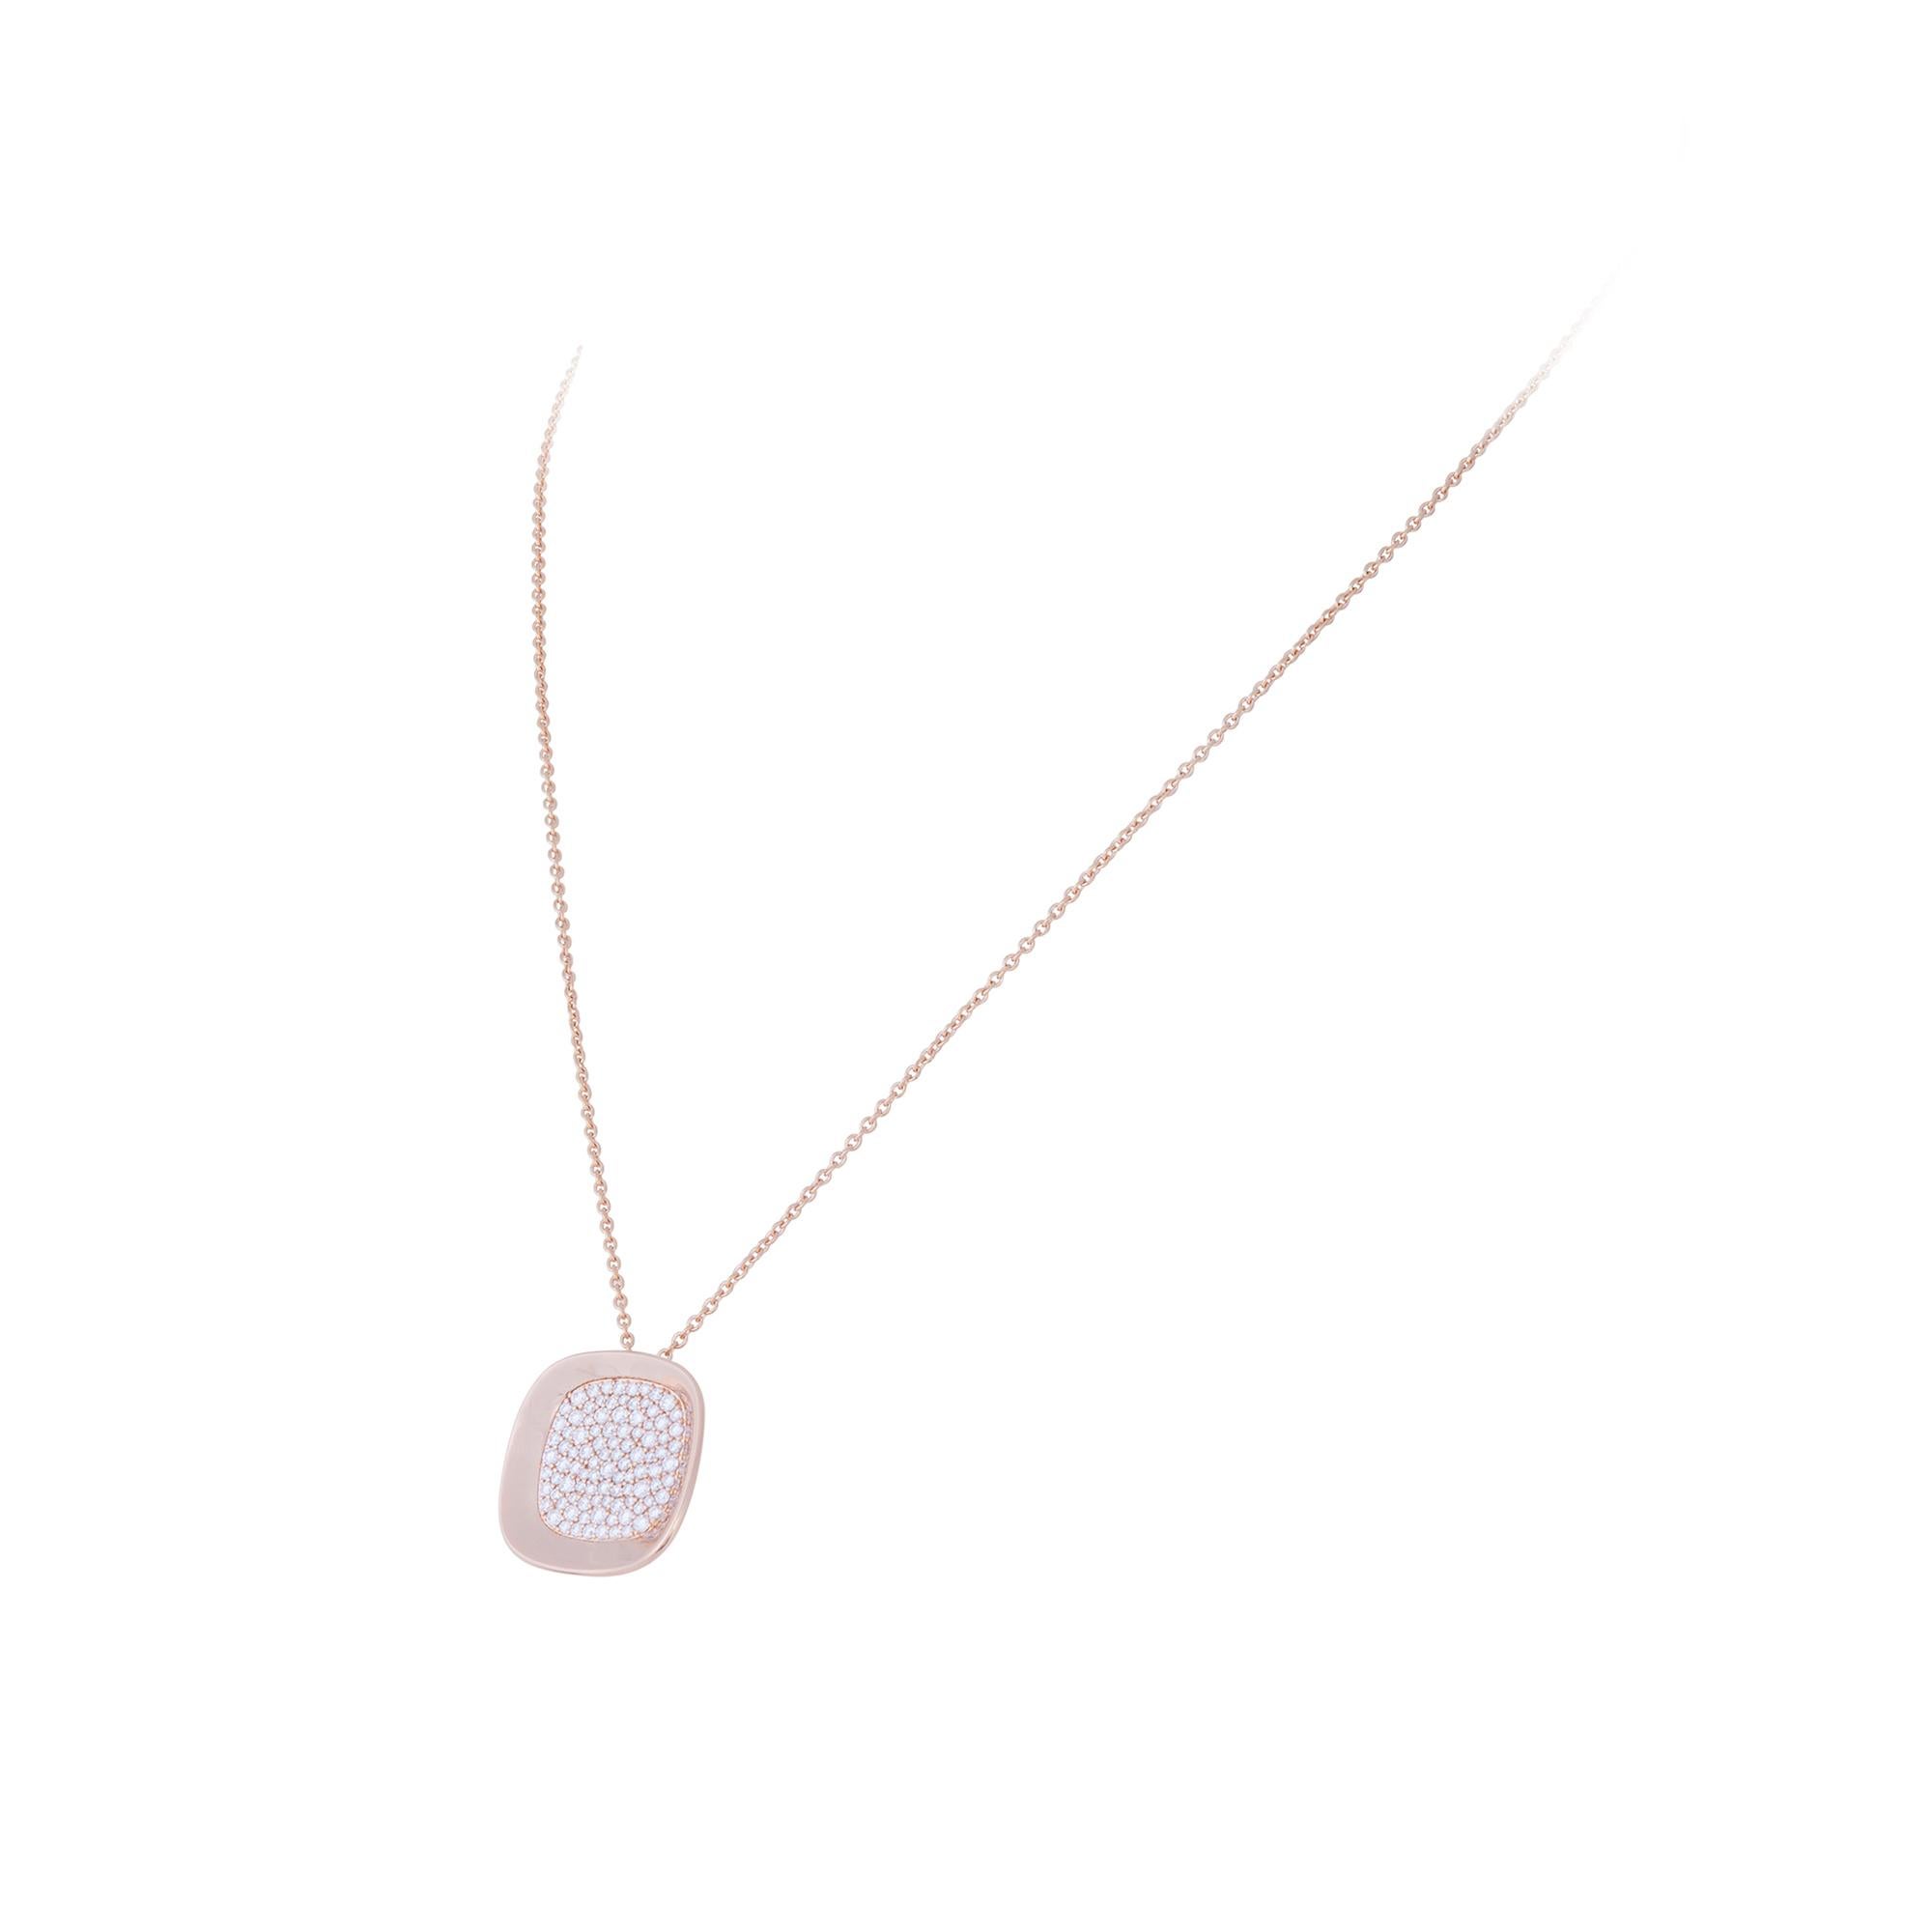 Authentic Roberto Coin necklace from the Carnaby Street collection crafted in 18 karat rose gold.  The high polished gold pendant is pave set with approximately 0.88 carats of round brilliant cut diamonds and hangs from an adjustable chain measuring